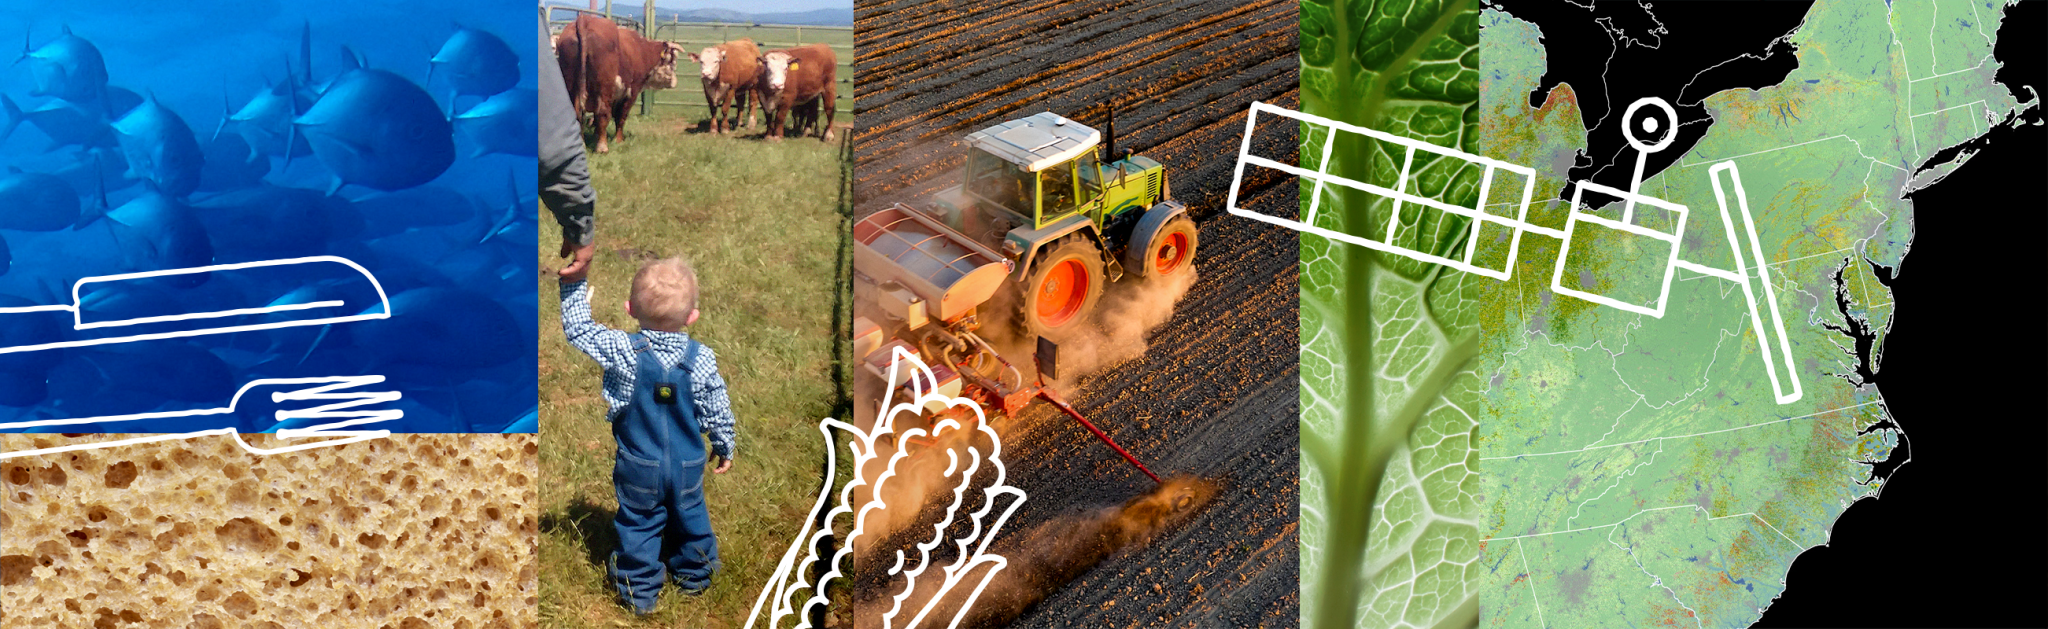 Montage of four images of agriculture with white satellite and corn graphic outlines over the top.